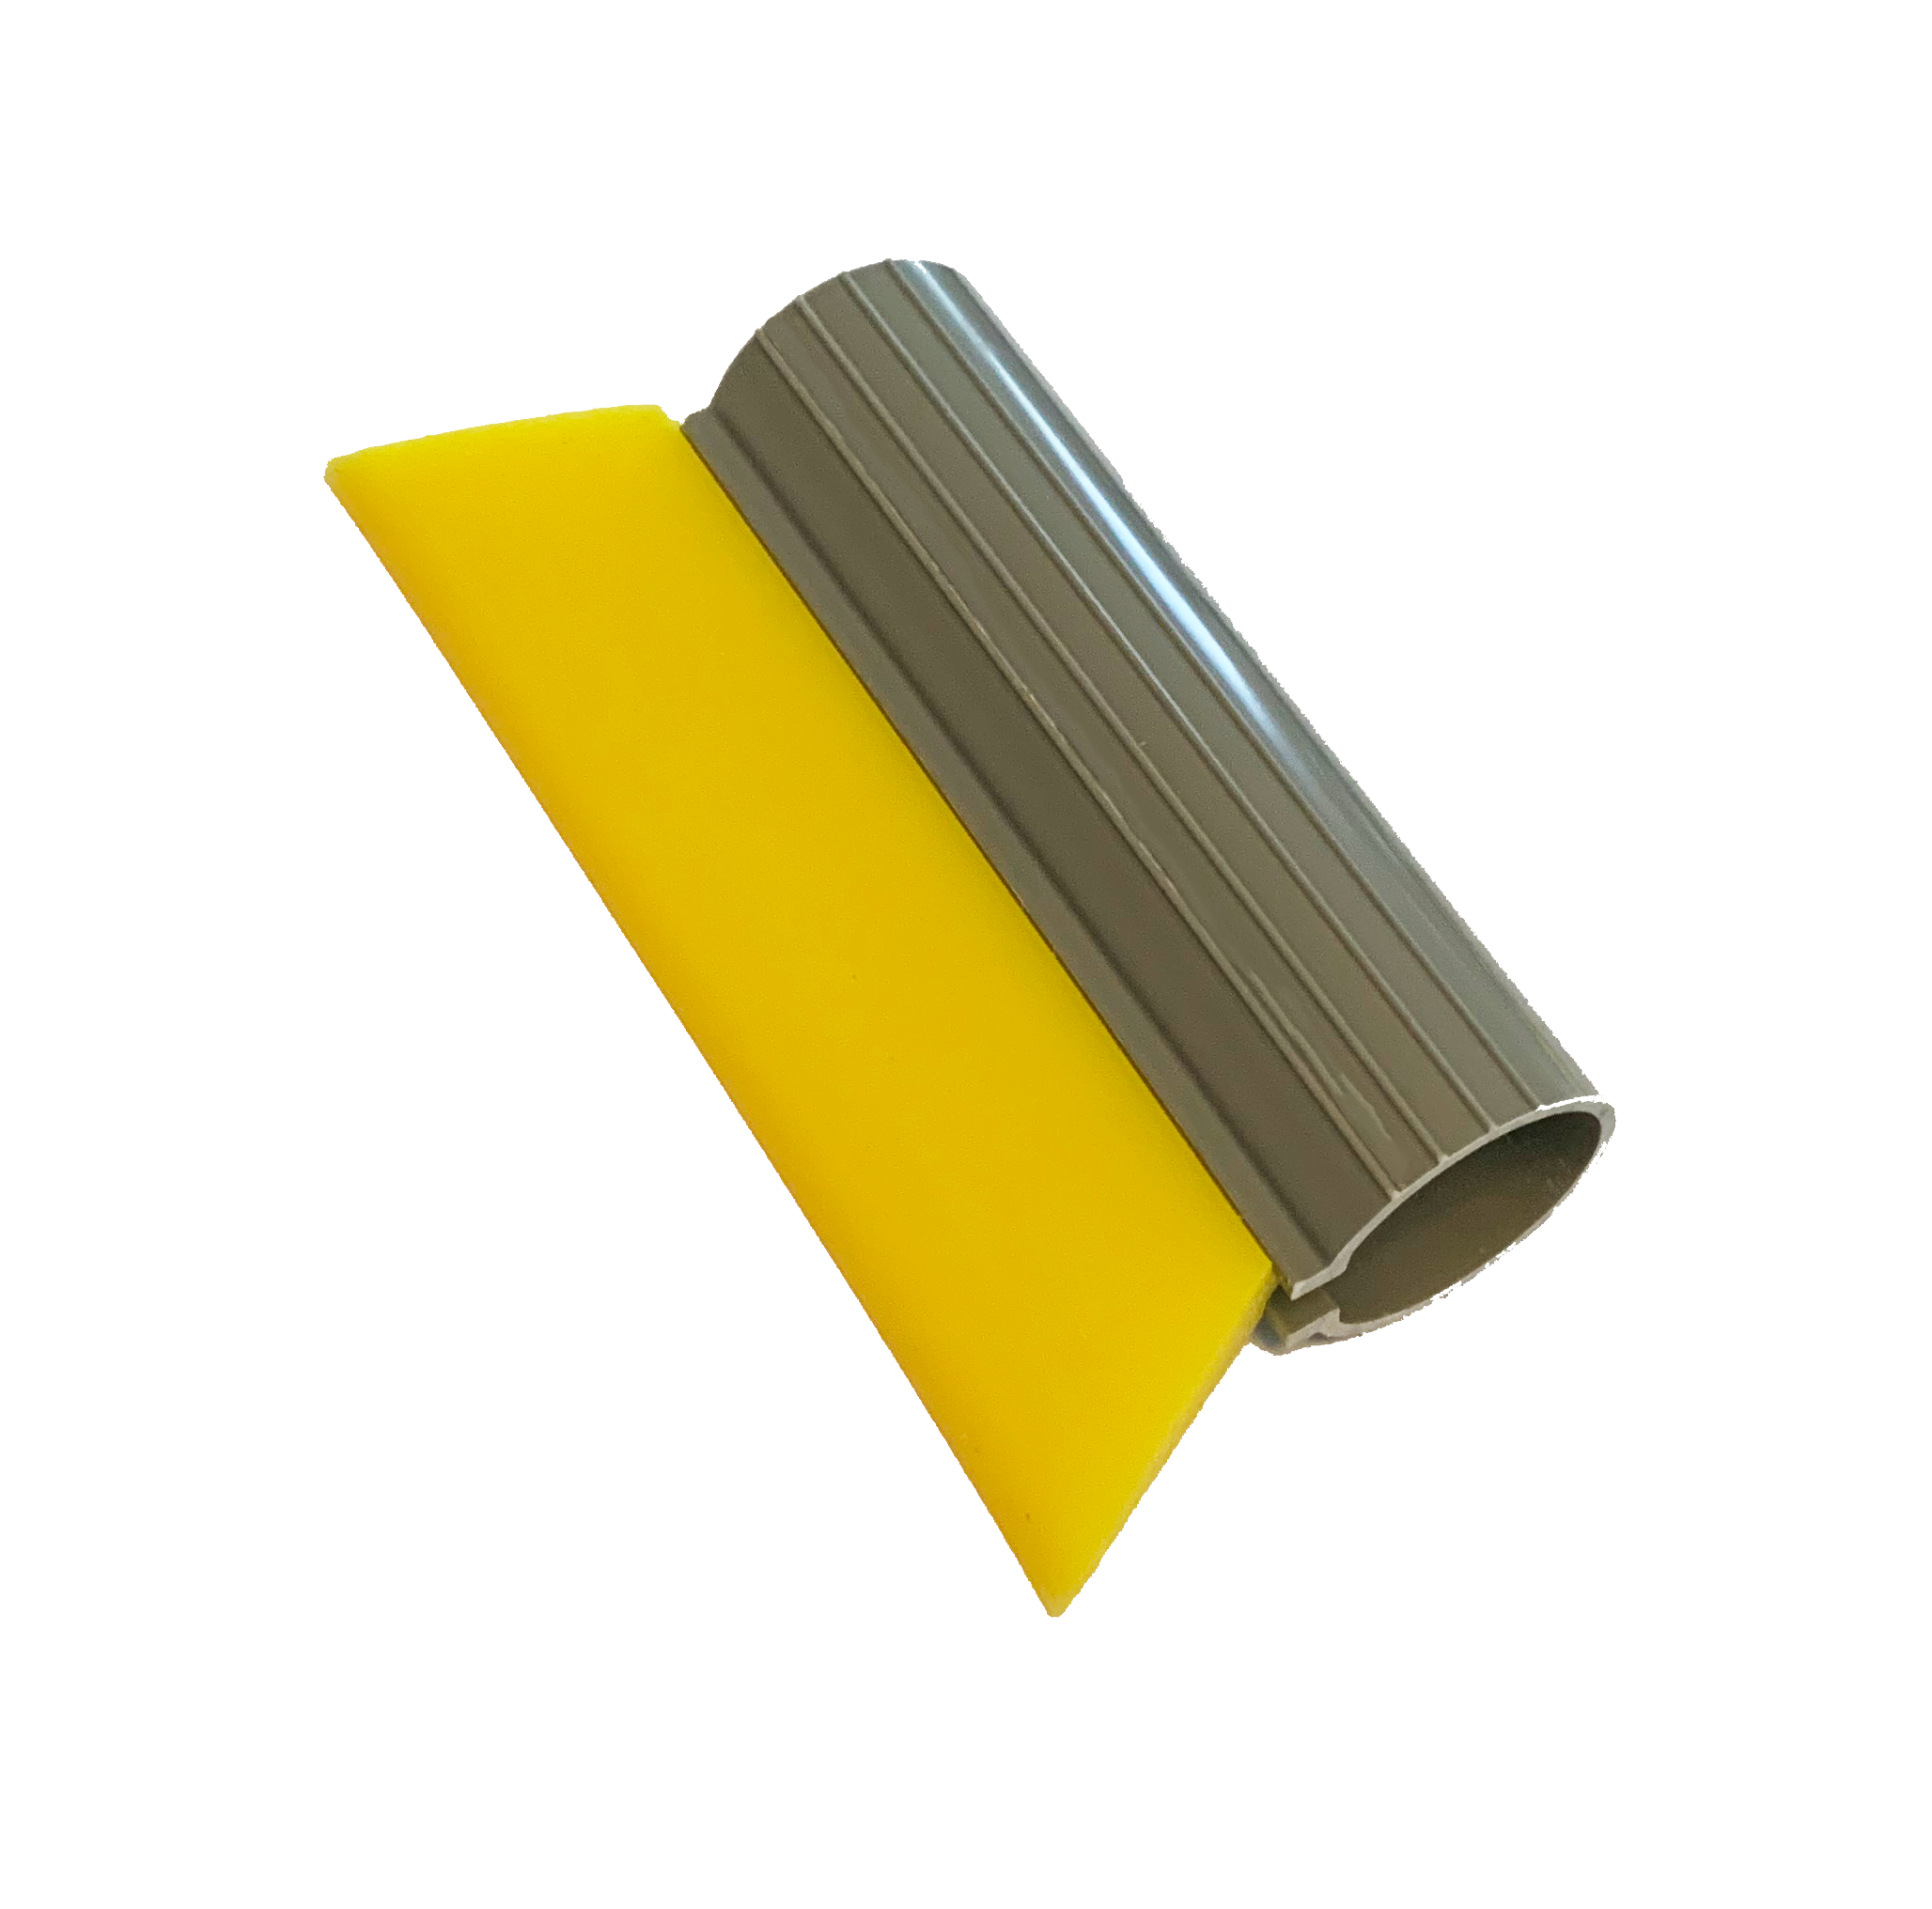 Turbo Squeegee with Handle